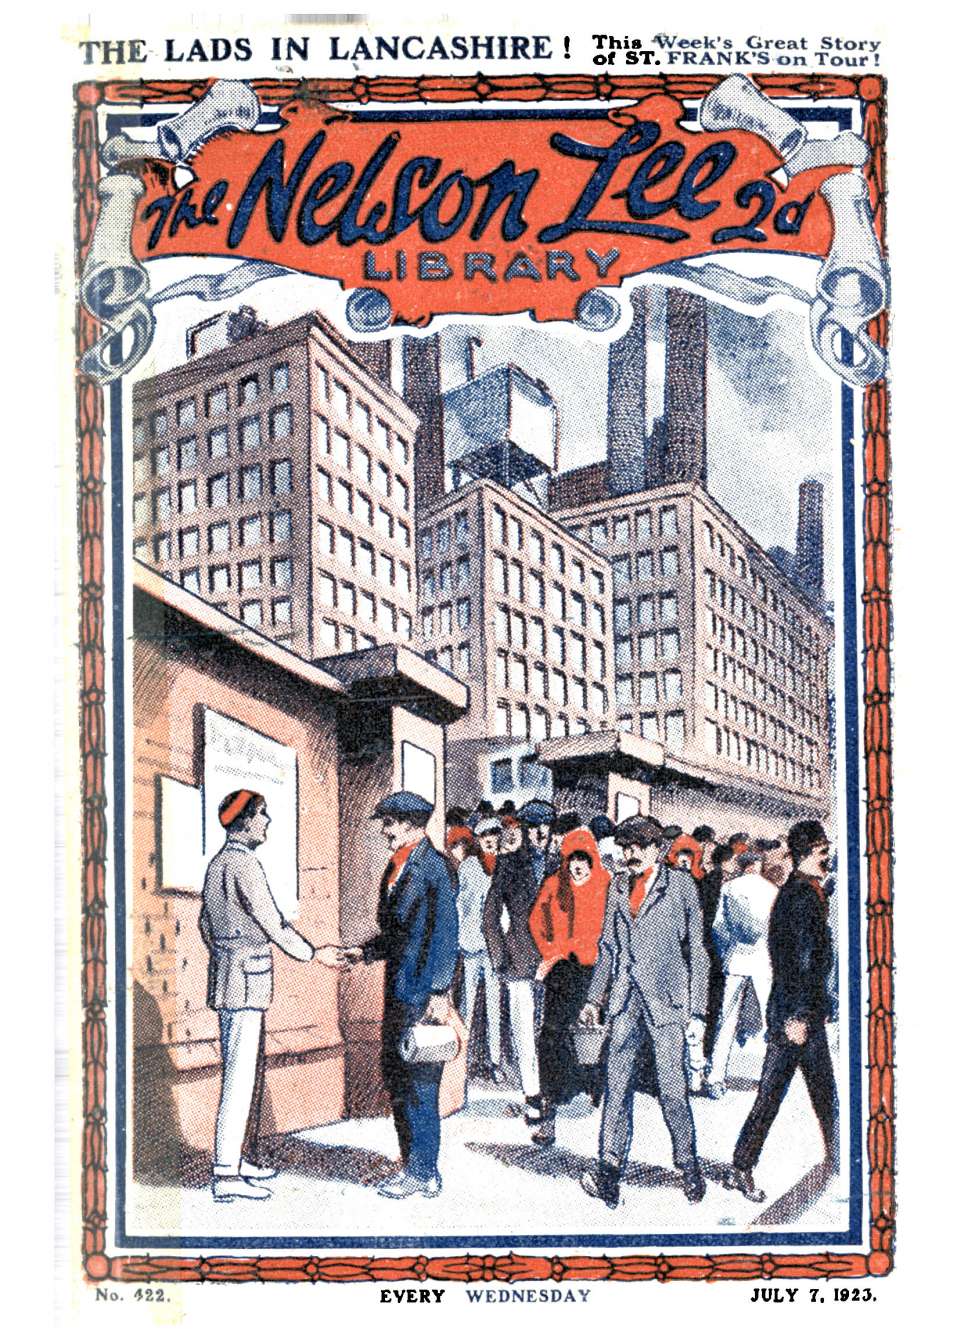 Book Cover For Nelson Lee Library s1 422 - The Lads in Lancashire